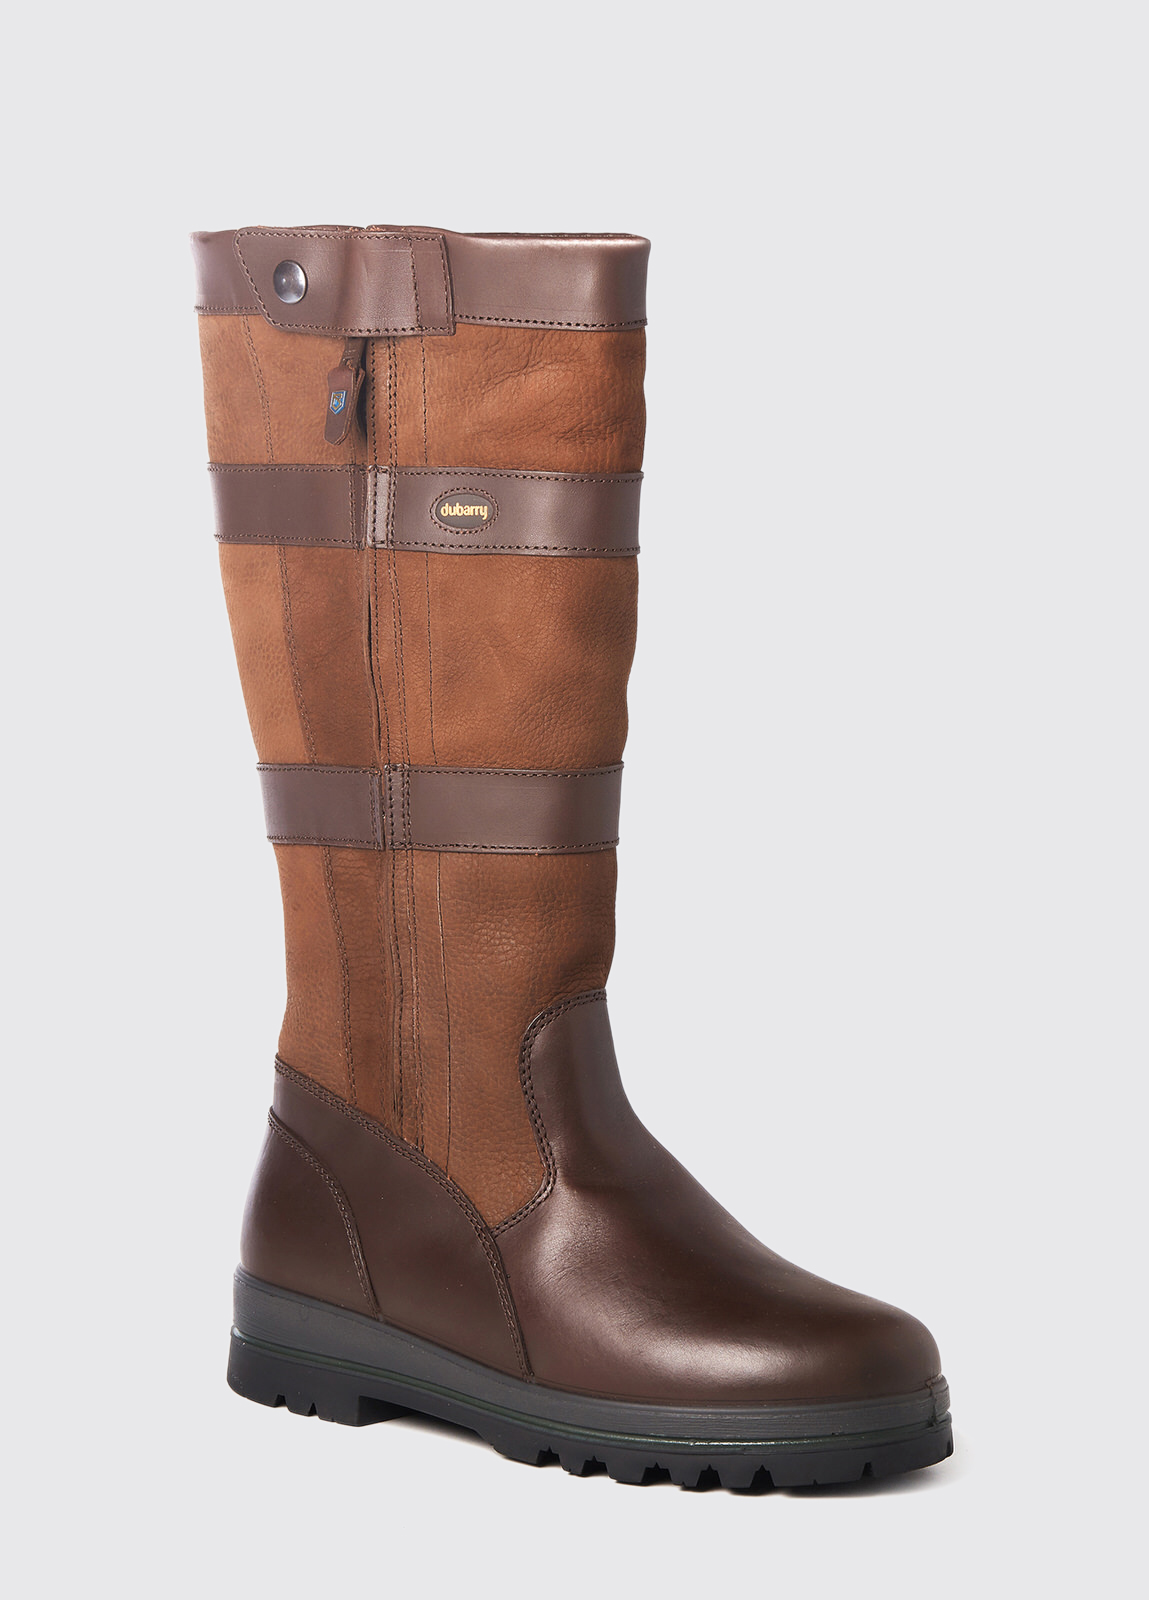 Wexford Walnut Country Boots | Dubarry USA